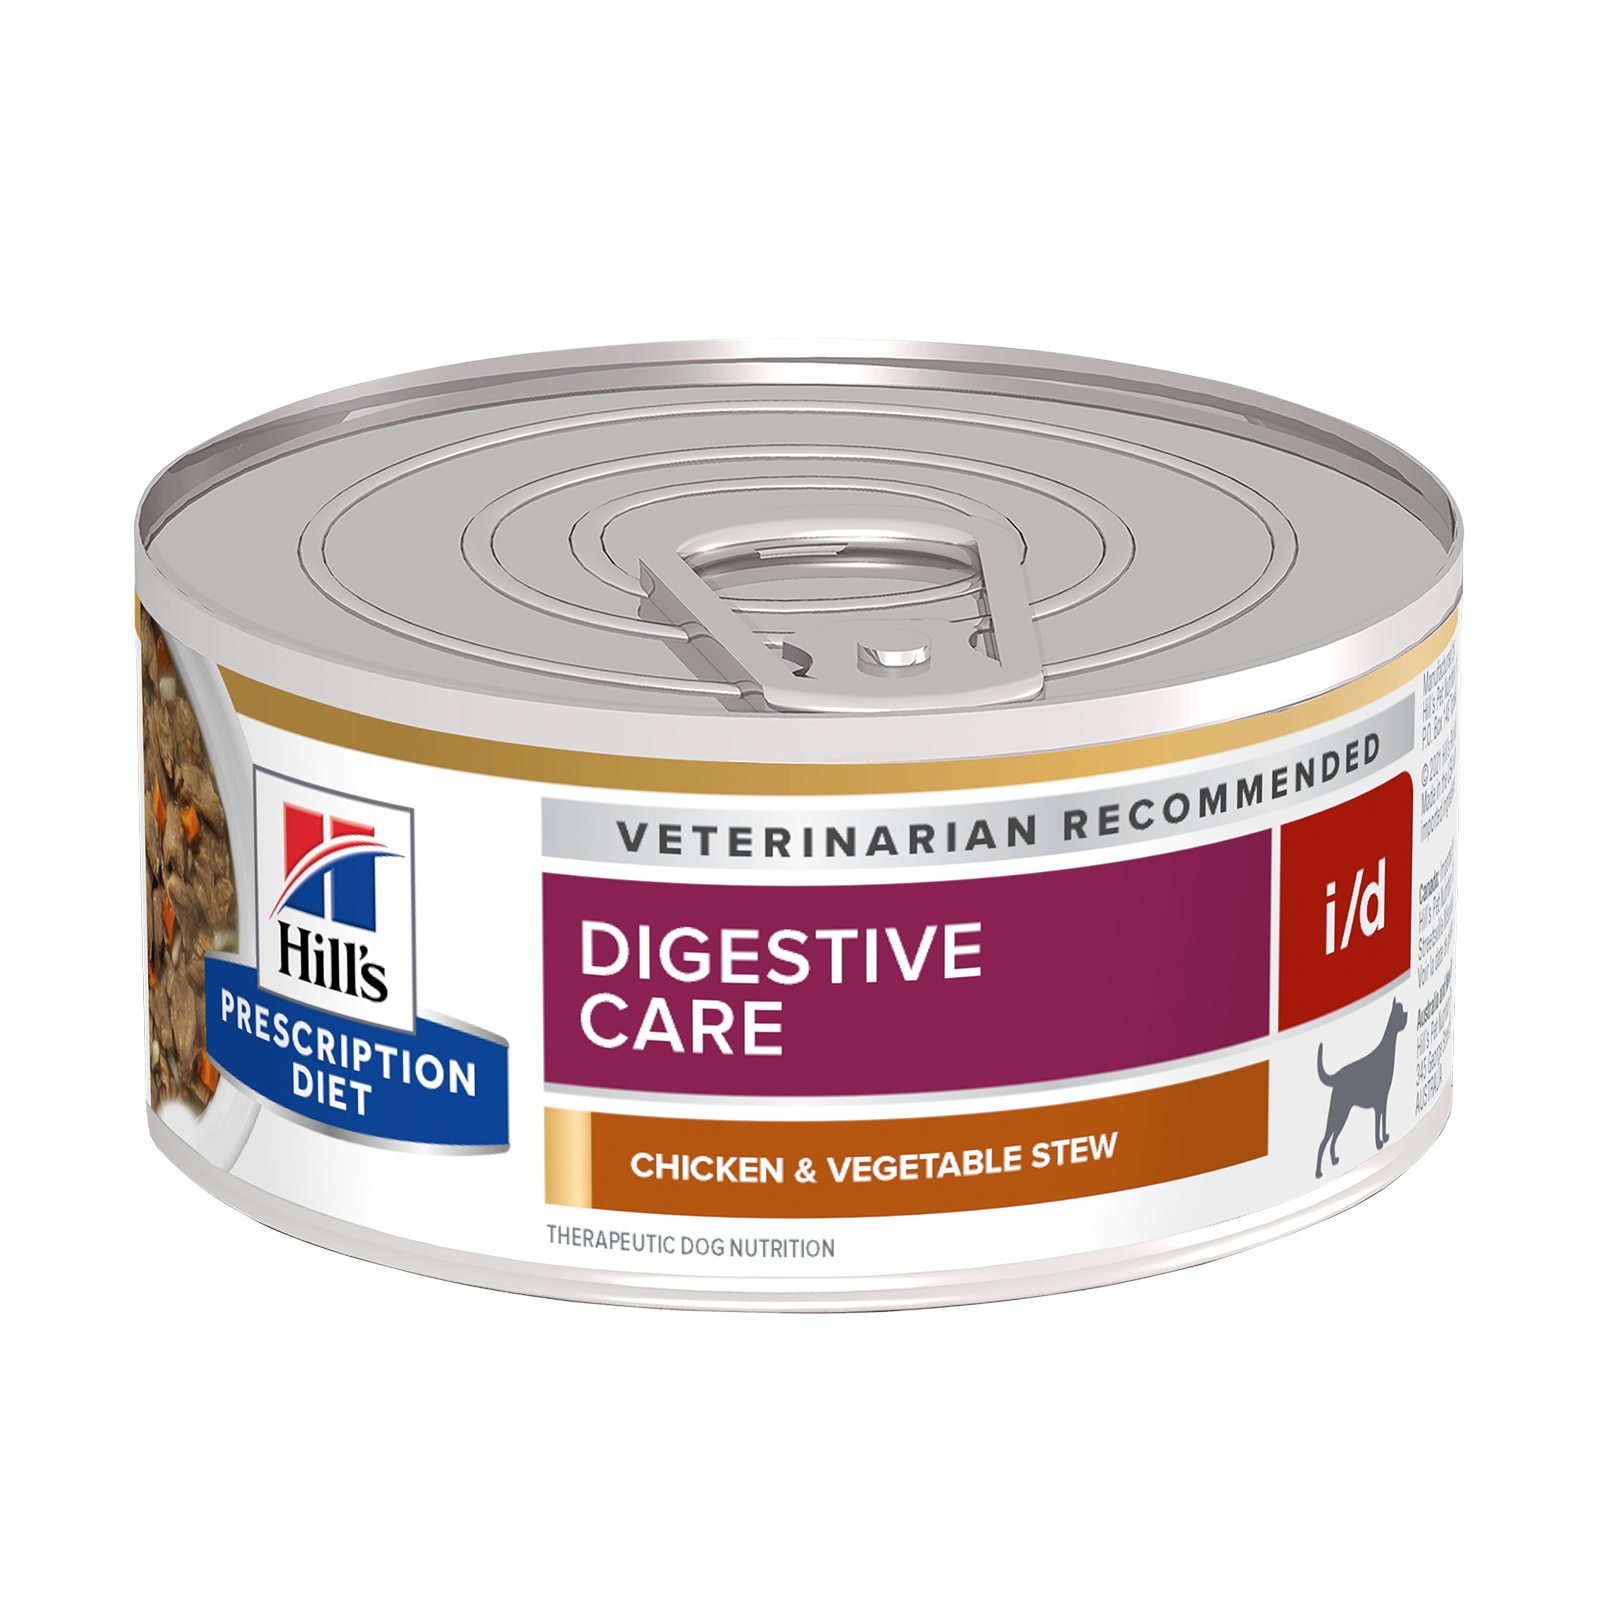 Hill's Prescription Diet Dog Food Can i/d Digestive Care Chicken & Vegetable Stew